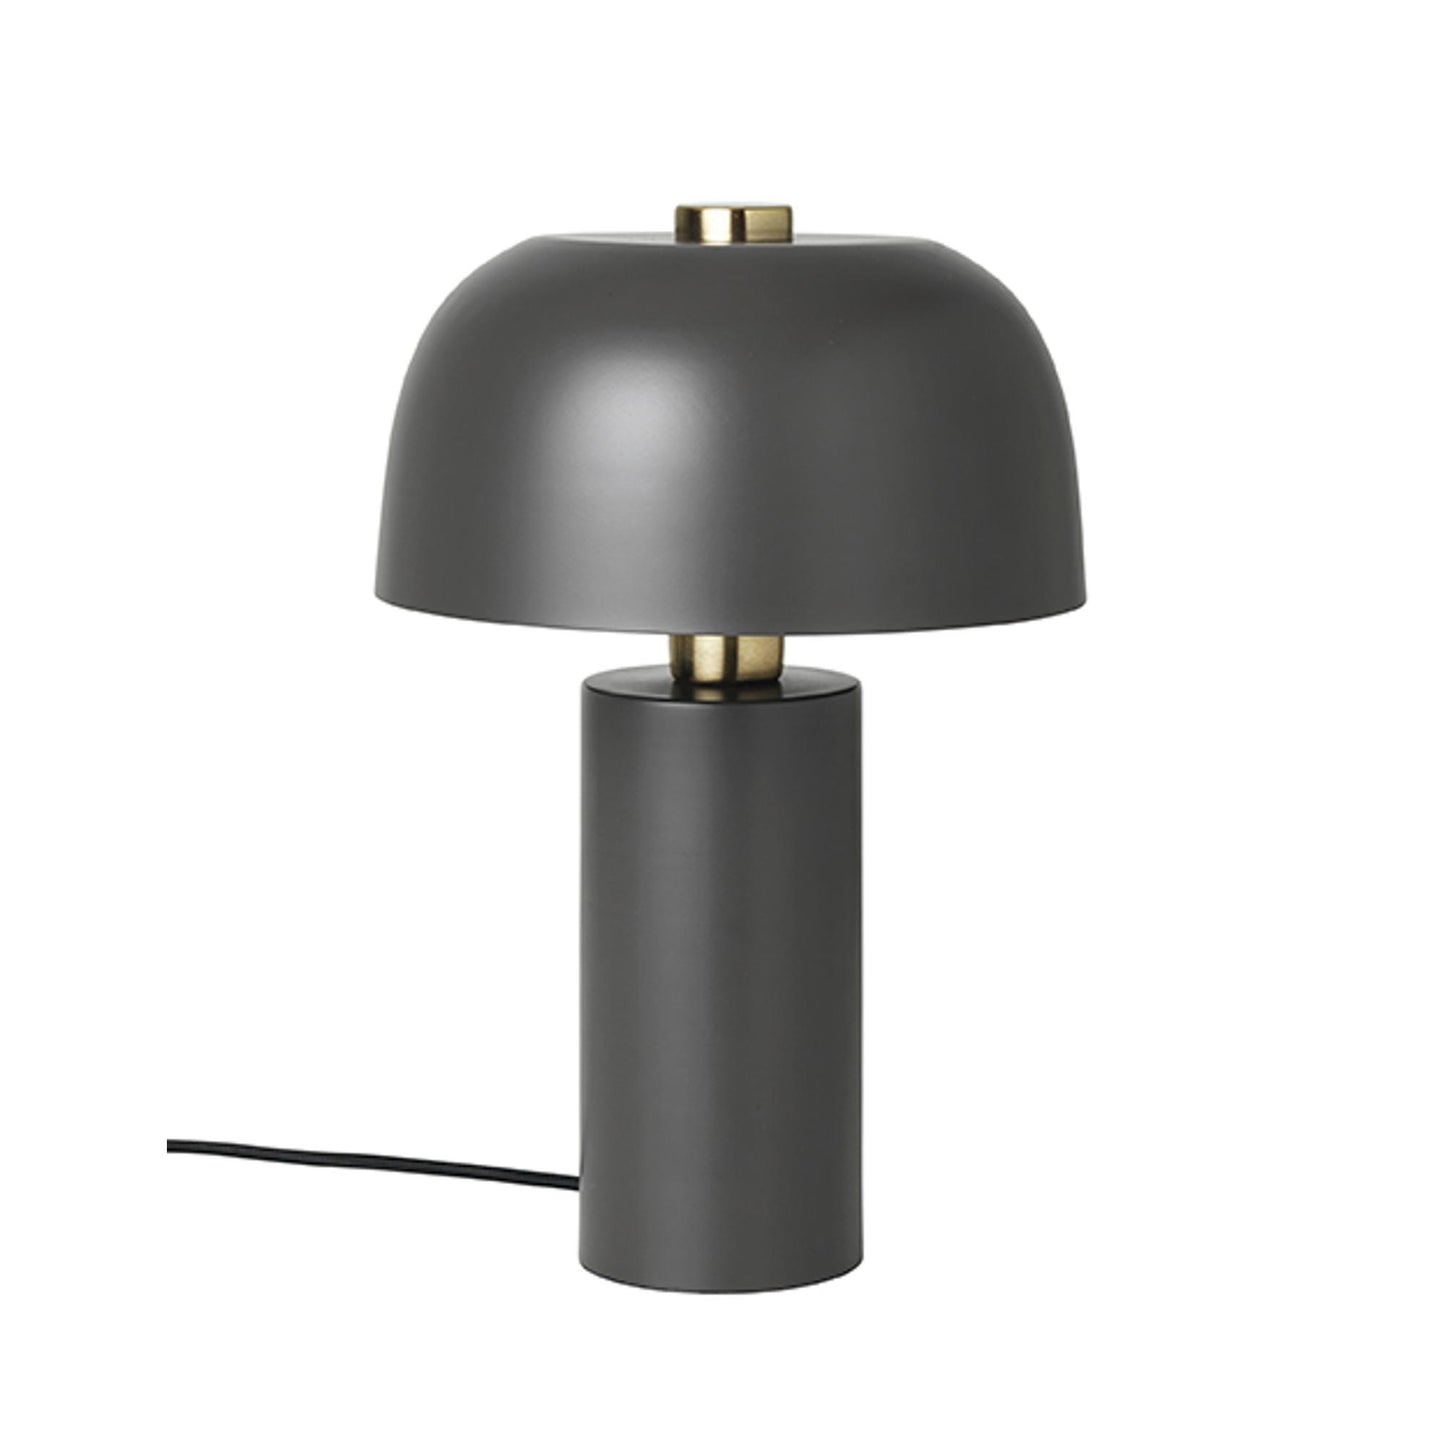 Lulu Table Lamp by Cozy Living #Coal